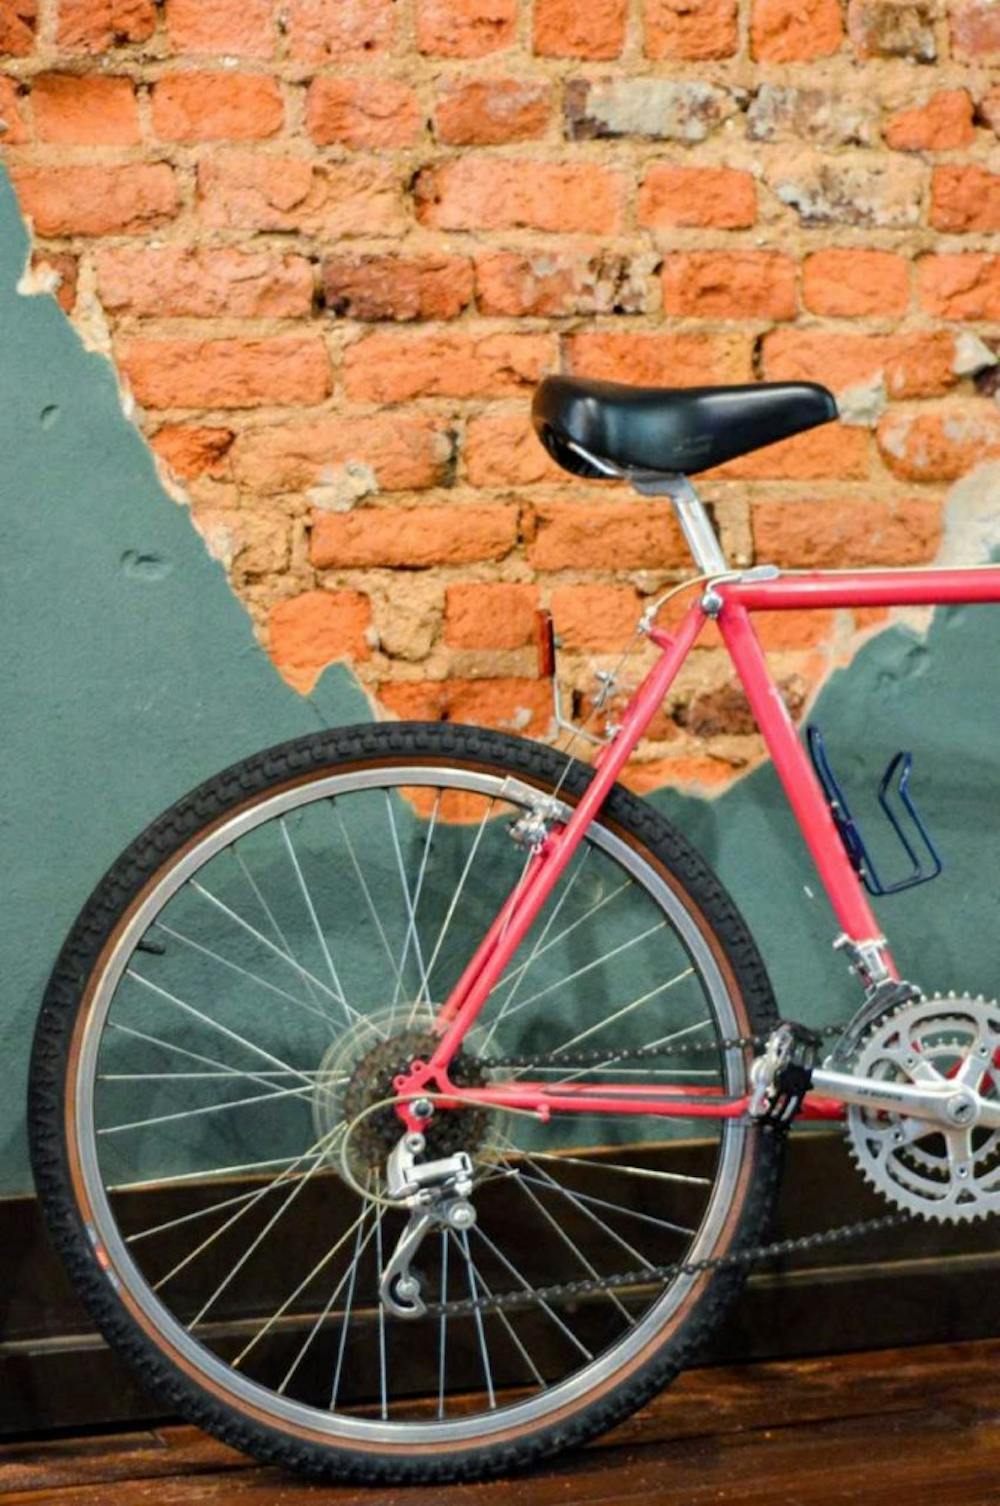 <p>A bike sits parked by an aged brick wall in James Bros Bike shop in downtown Opelika, Ala.&nbsp;</p>